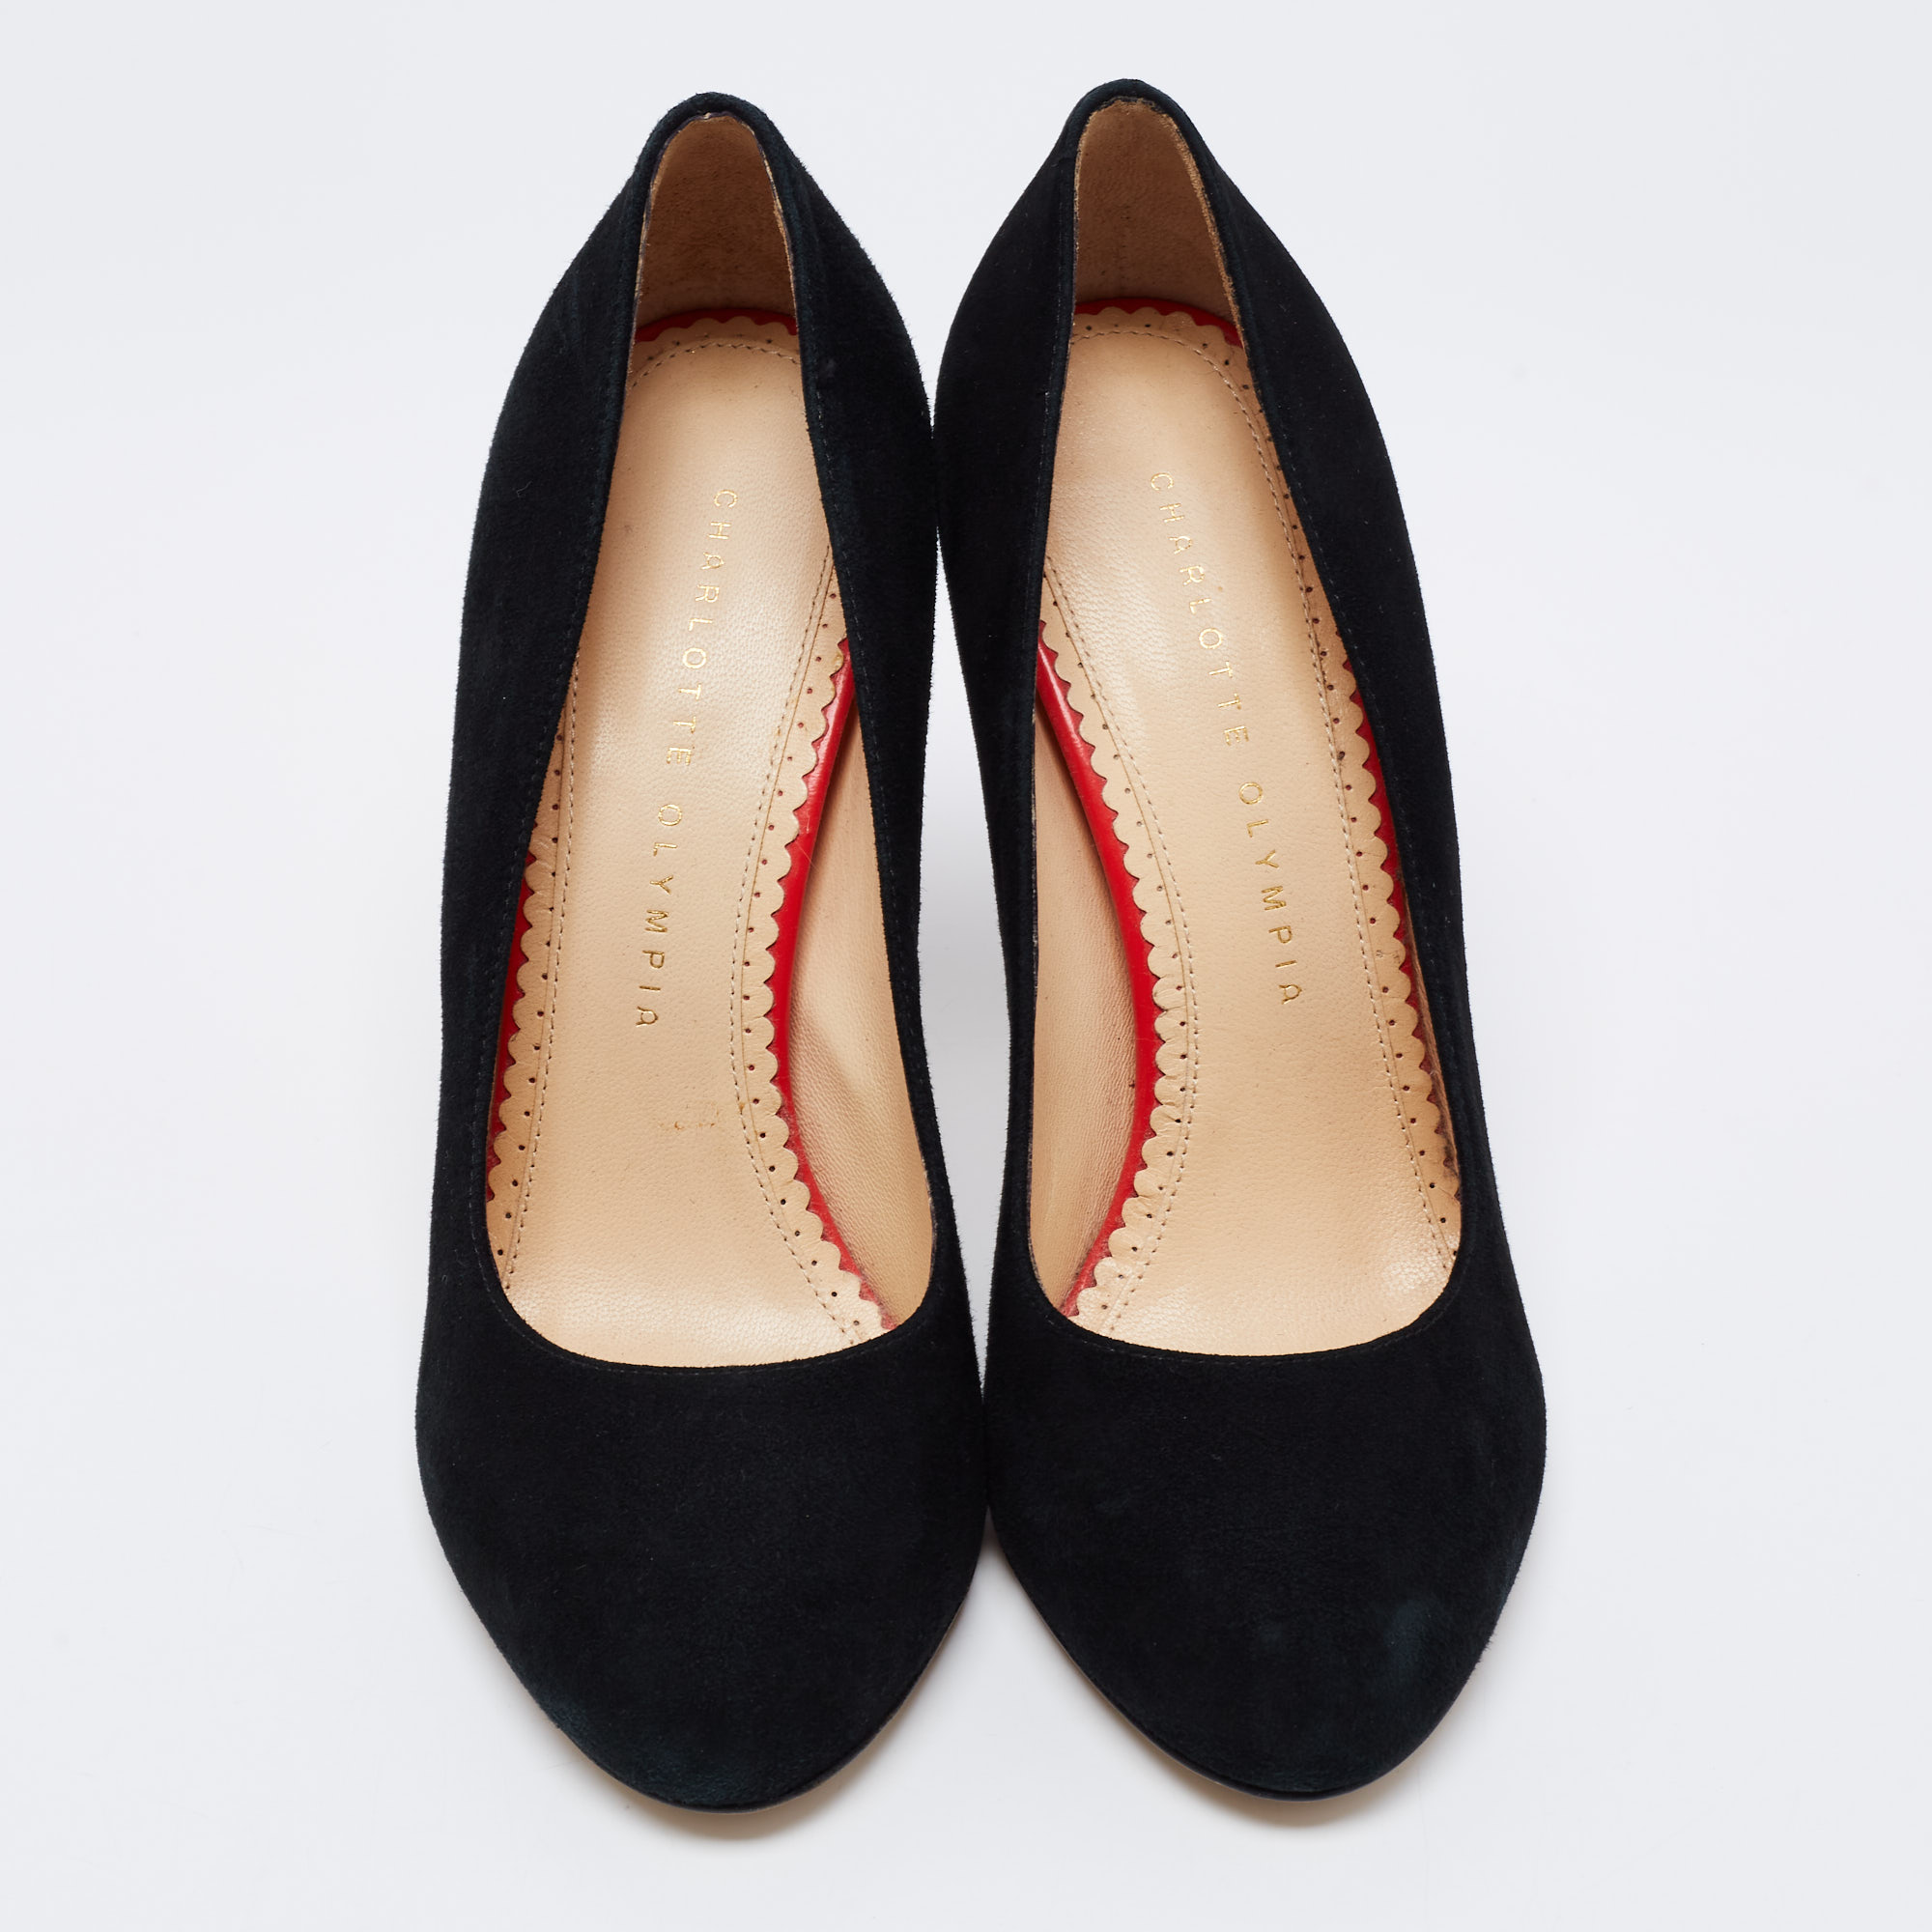 Charlotte Olympia Black Suede Mid Century Pumps Size 37.5